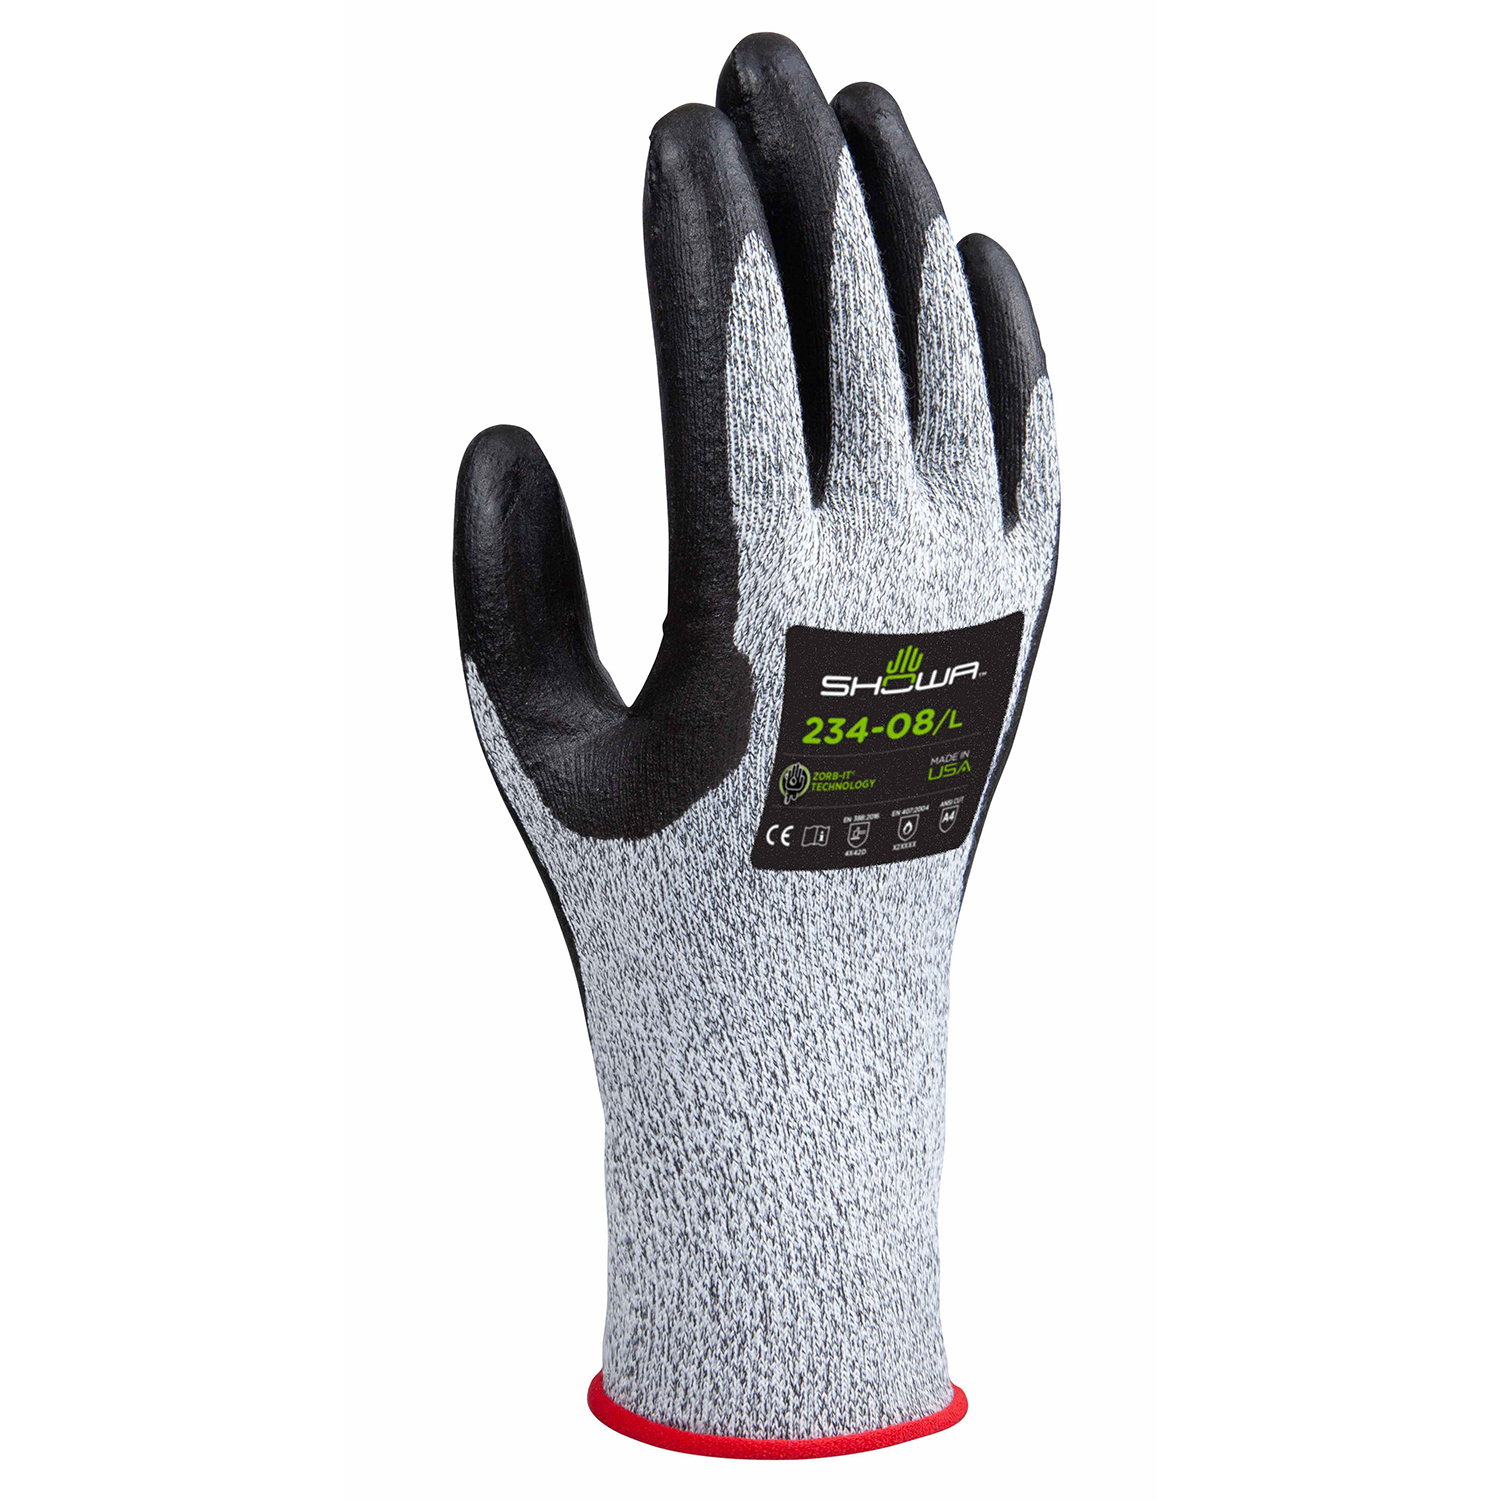 Foam nitrile palm, 15 gauge seamless spandex/engineered cut resistant liner reinforced w/HPPE,  black & white w/gray, ANSI CUT LEVEL A4/small